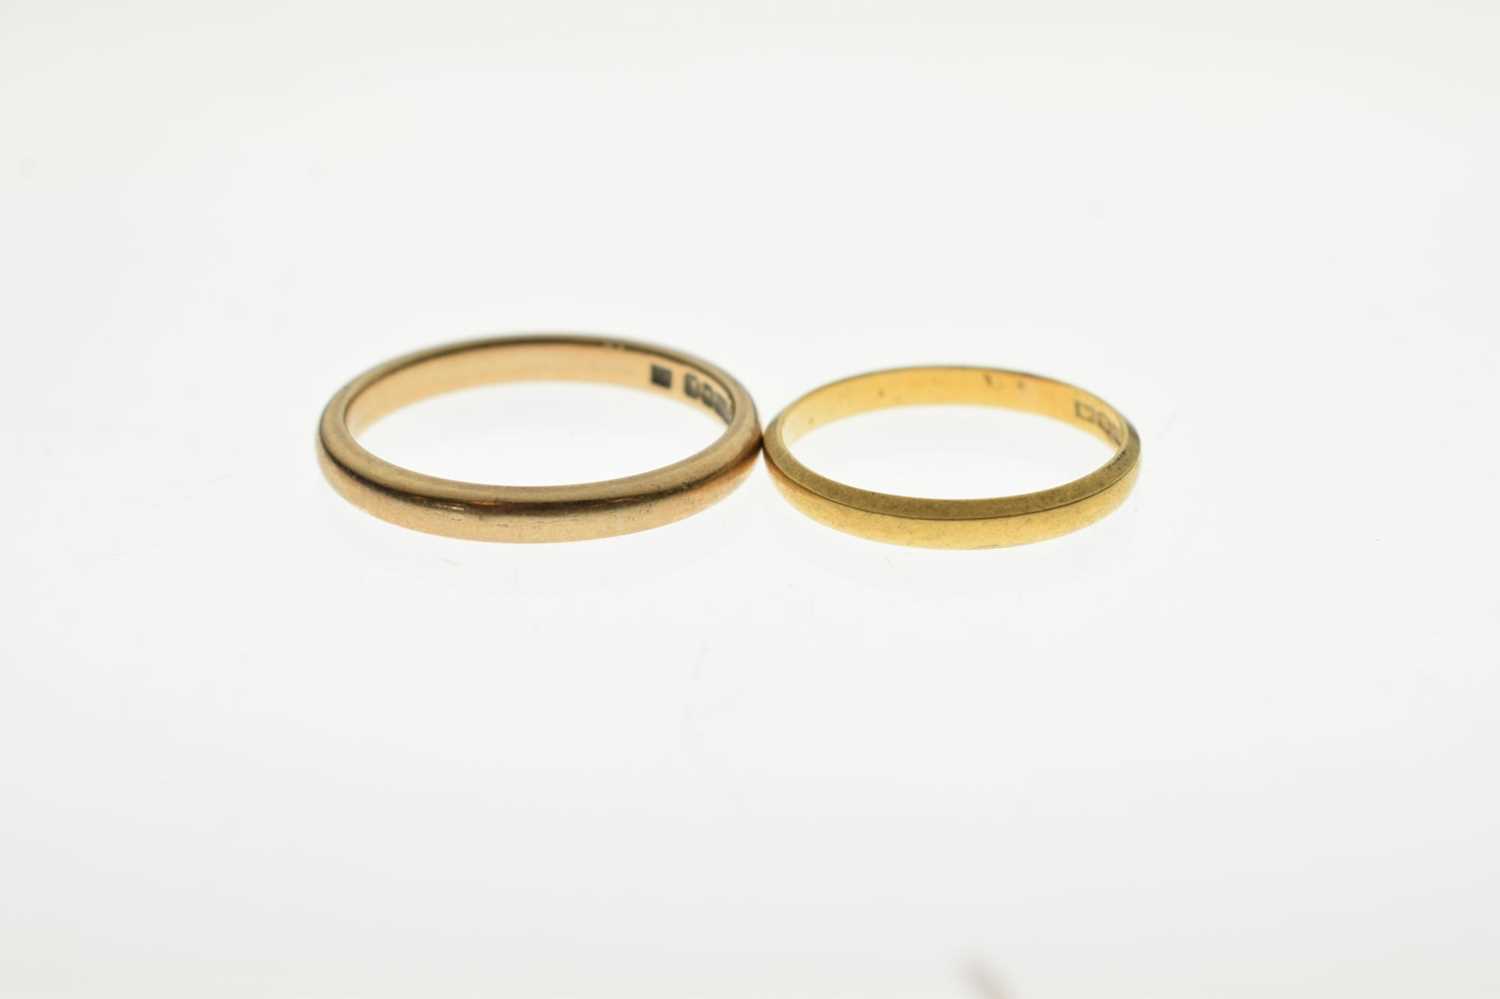 9ct gold wedding band and a Victorian yellow metal wedding band - Image 2 of 5